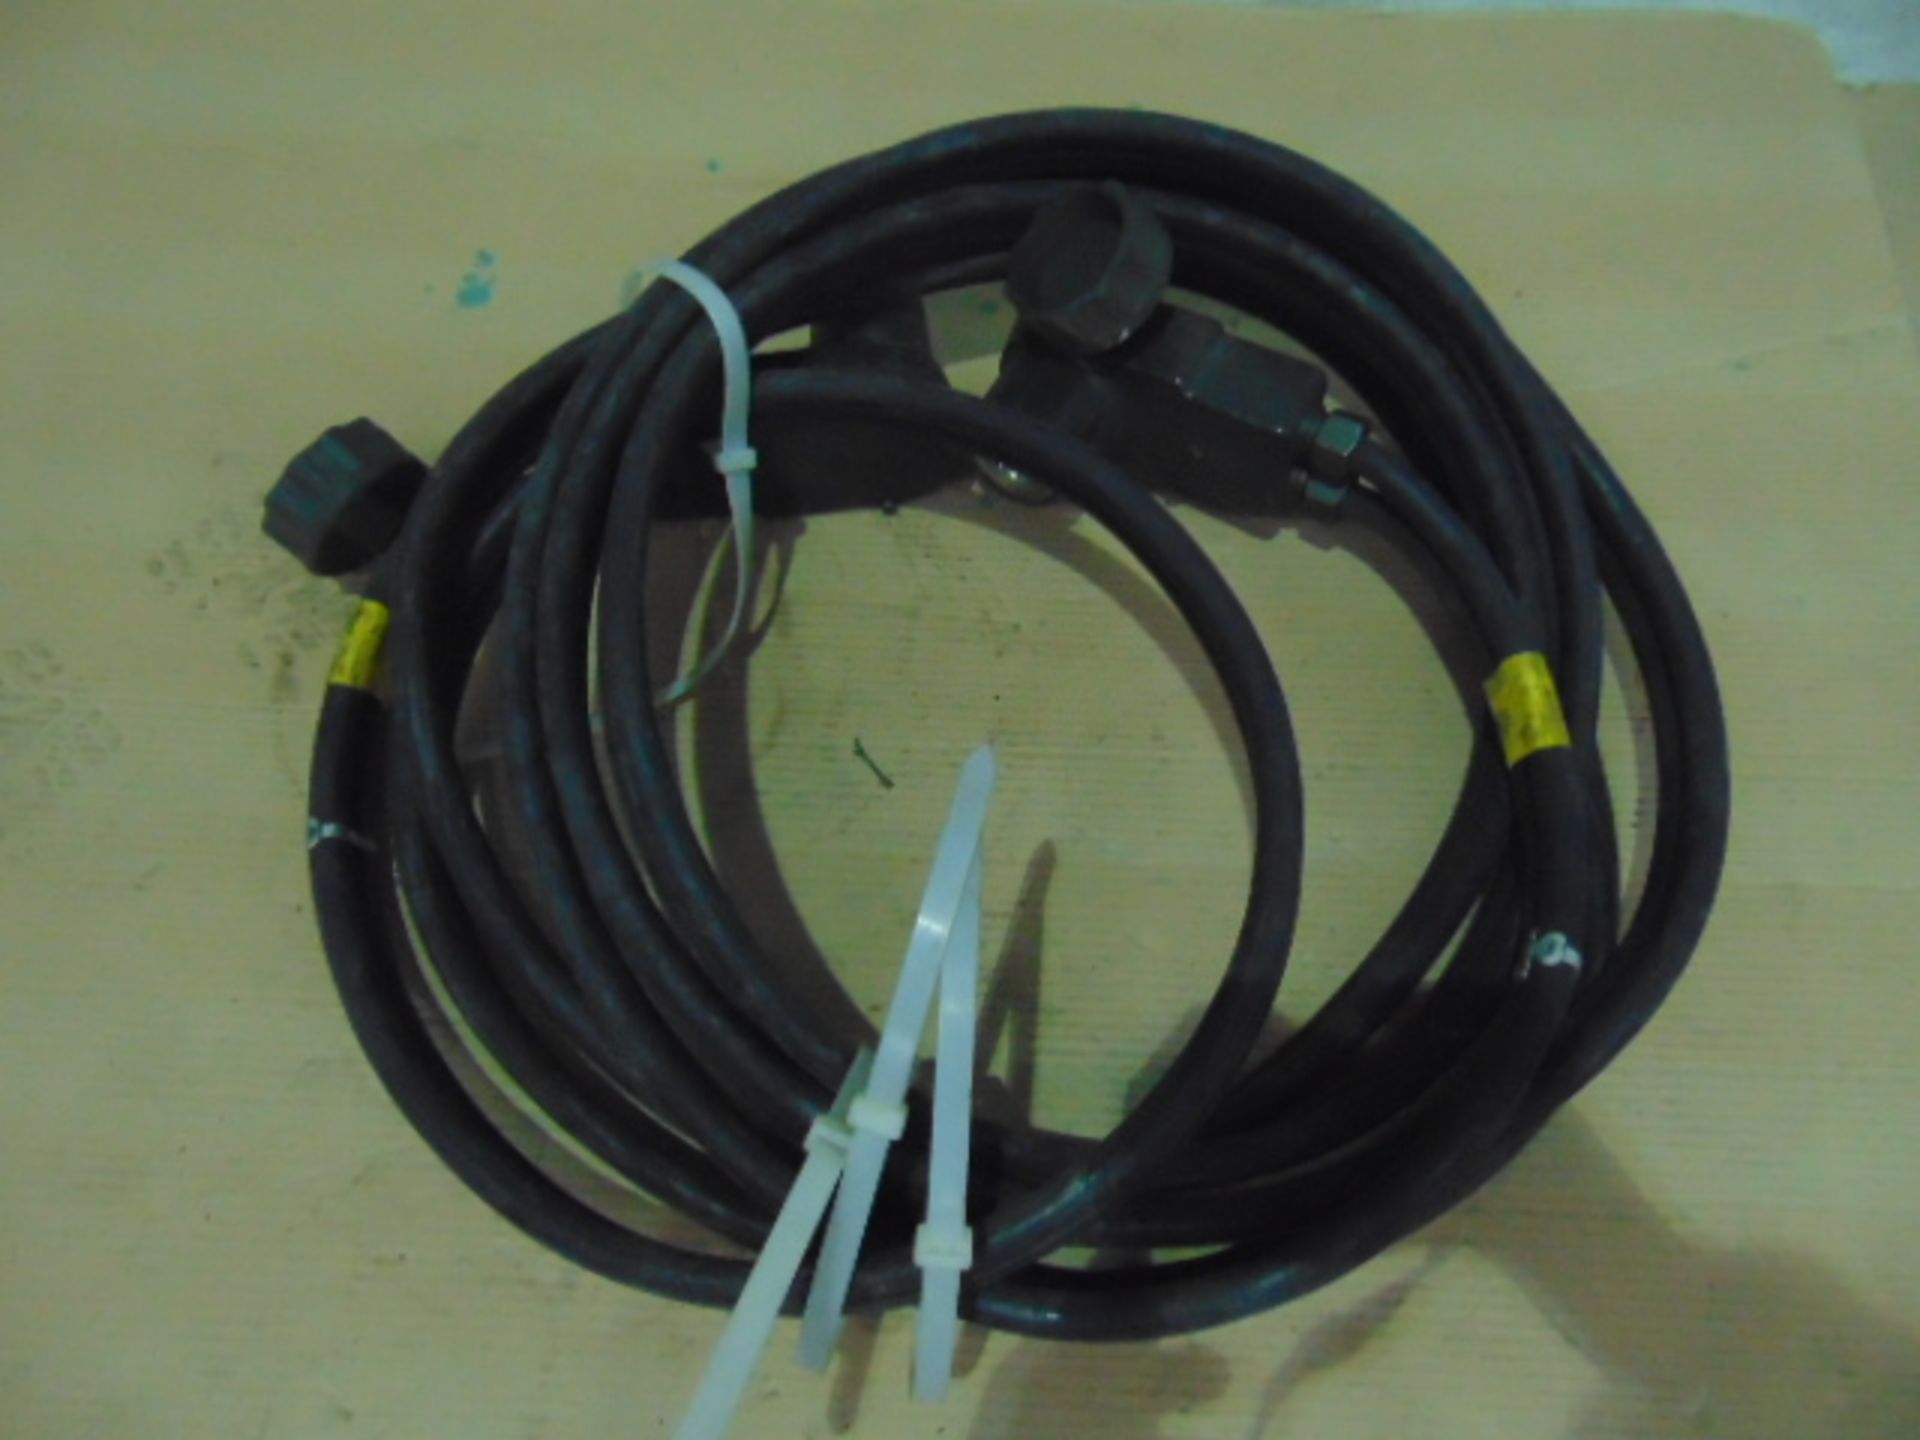 Inter-Vehicle Starting Cable